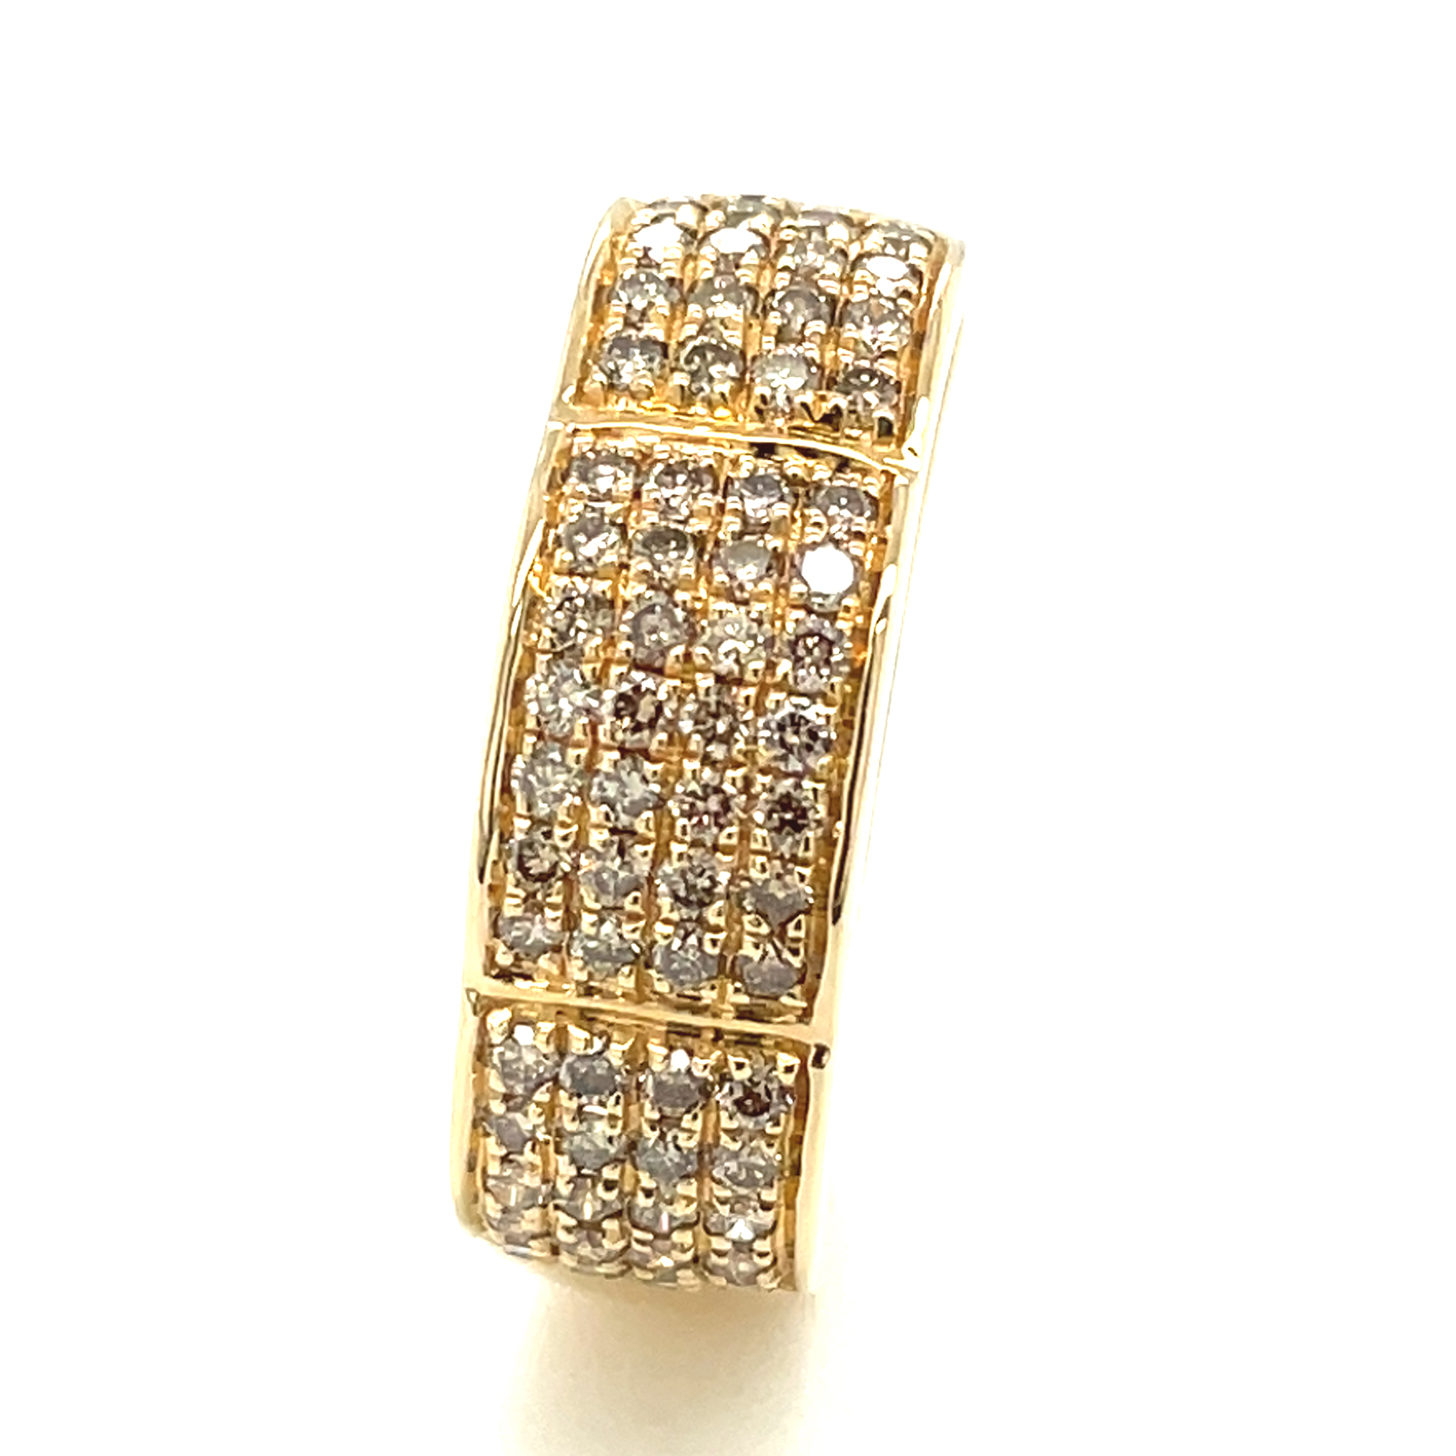 Brillant  champagner (TLB), ca. 0,532 ct. Edelstein, 585 Gelbgold Ring, Sogni d´oro Facettenreich